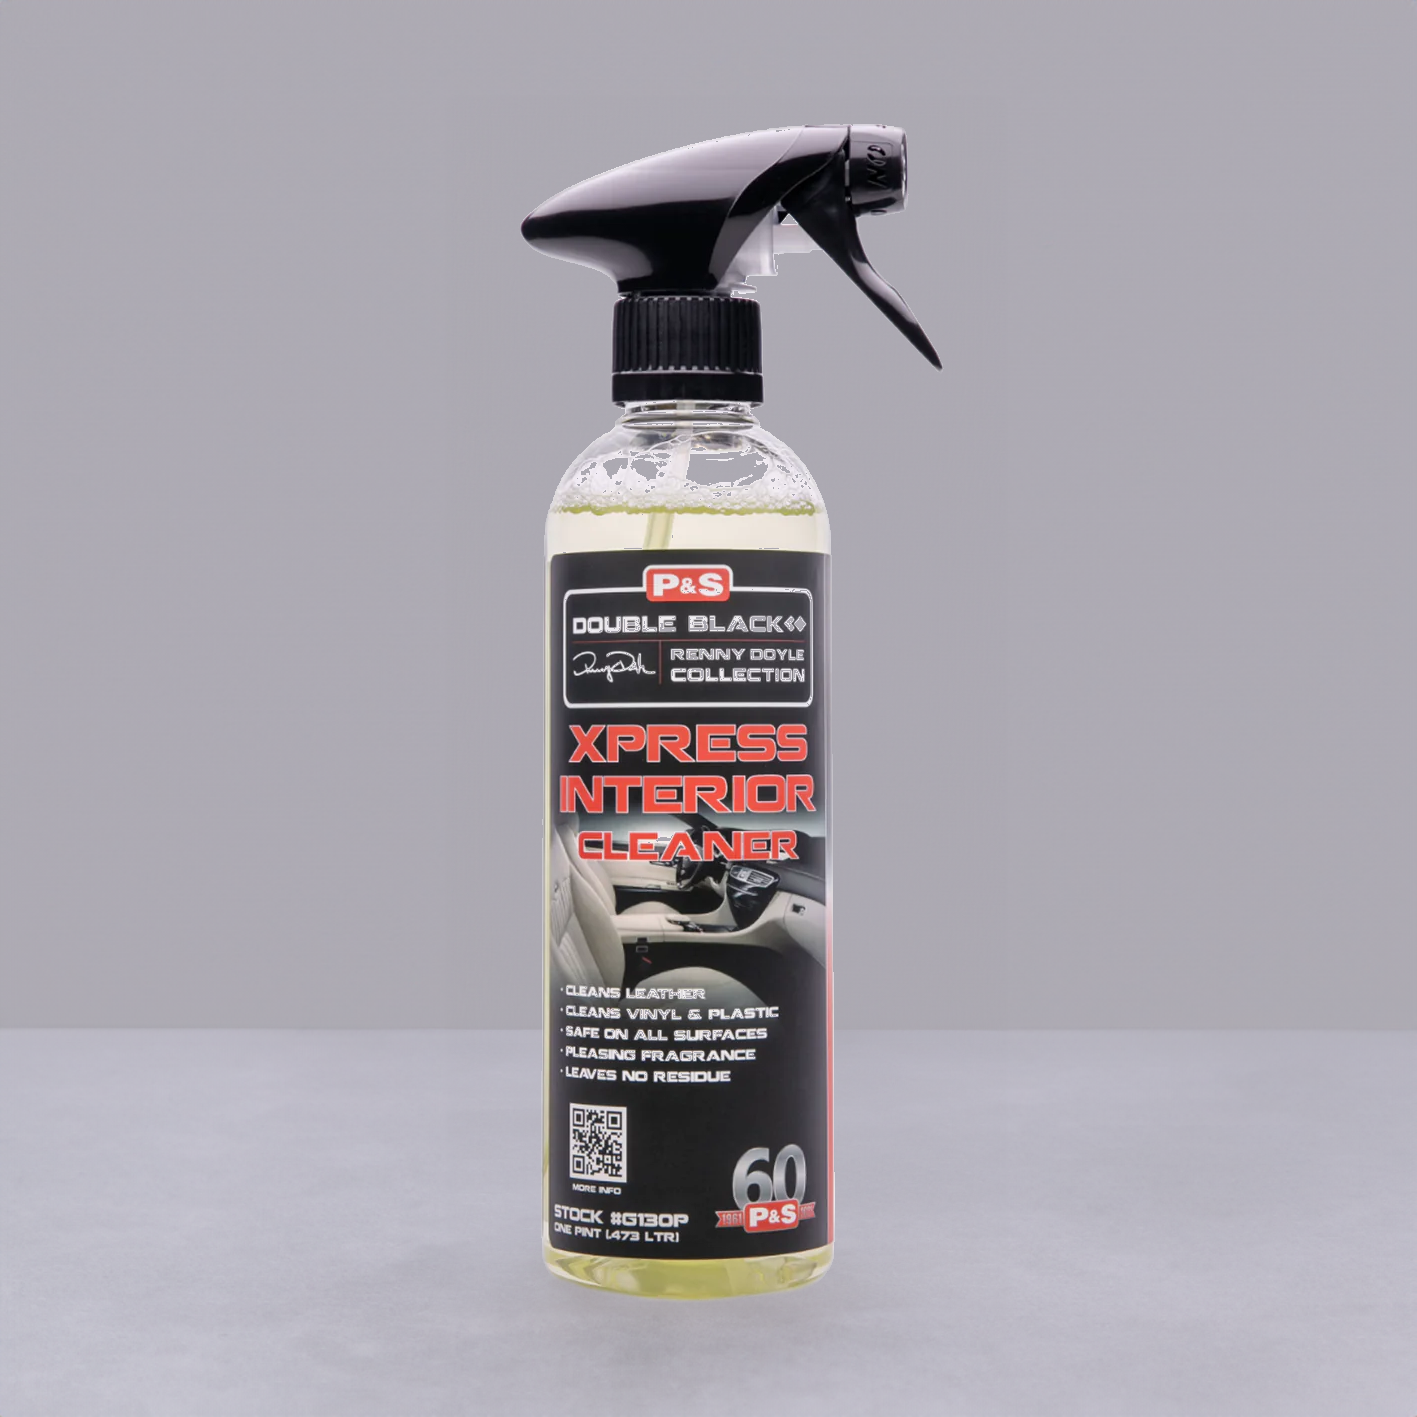 P&S XPRESS Interior Cleaner - Westchester Detailing Supply